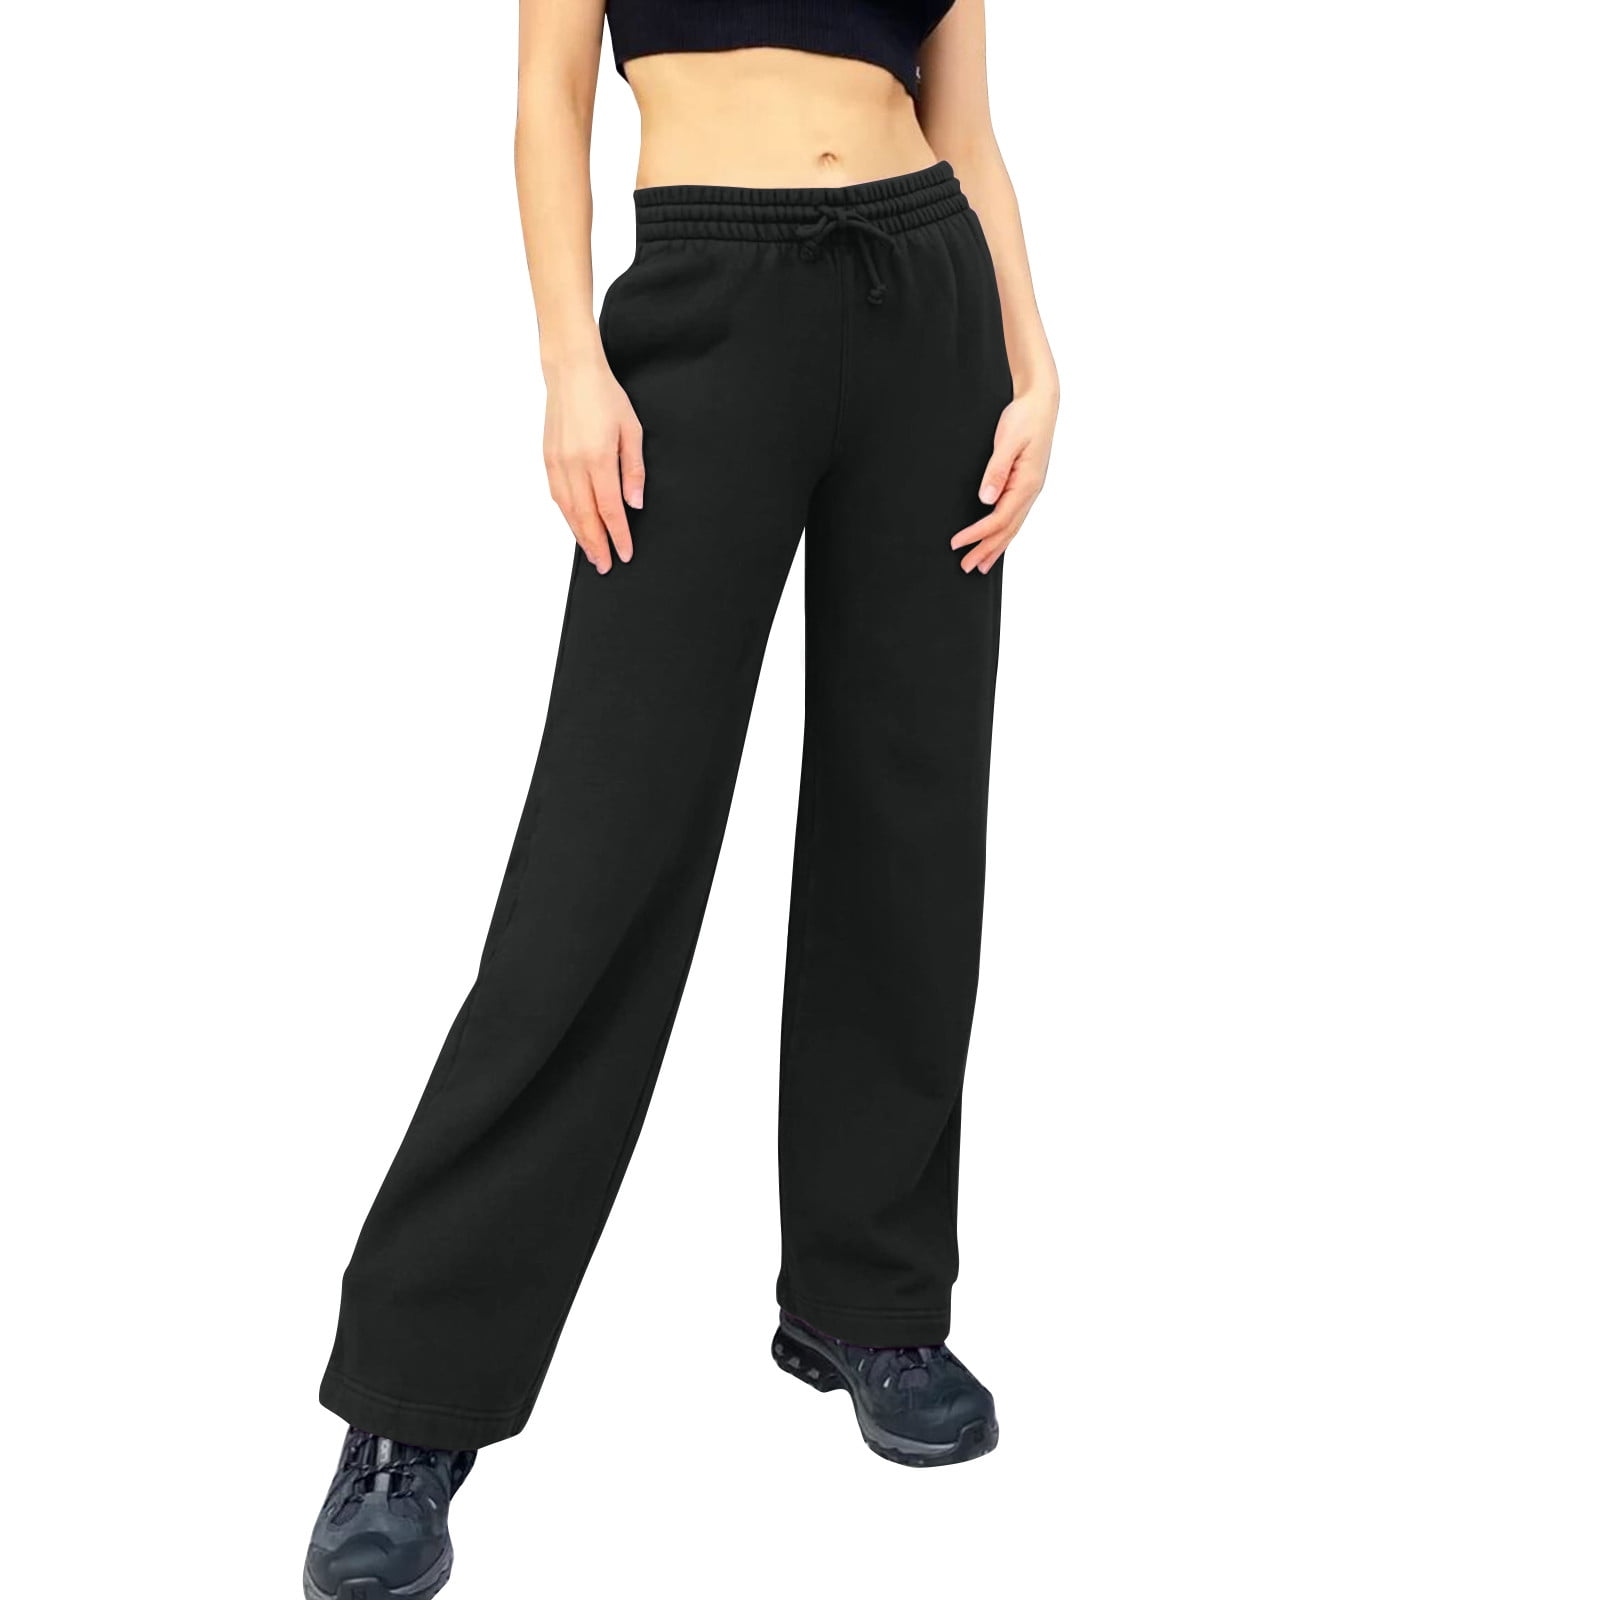 Susanny Tall Sweatpants for Women Drawstring Straight Leg with